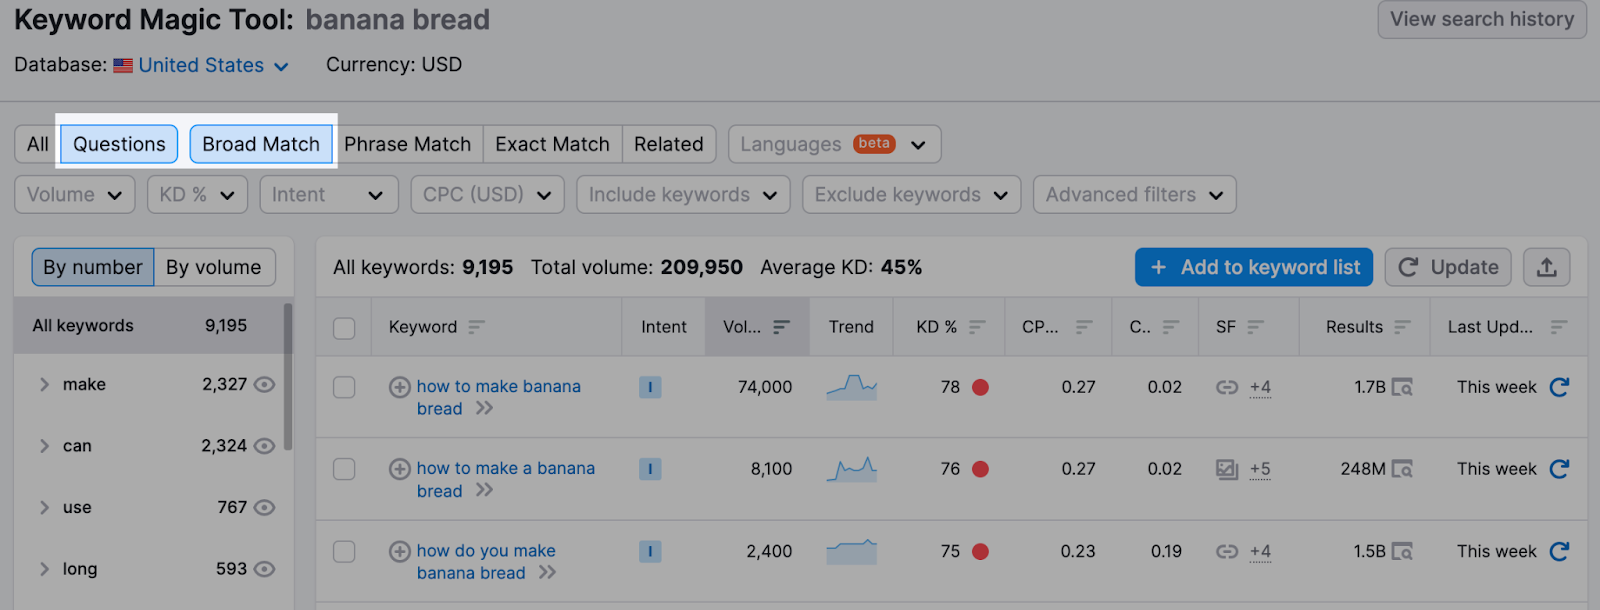 screenshot of Keyword Magic Tool where you can see how to find question-based keywords